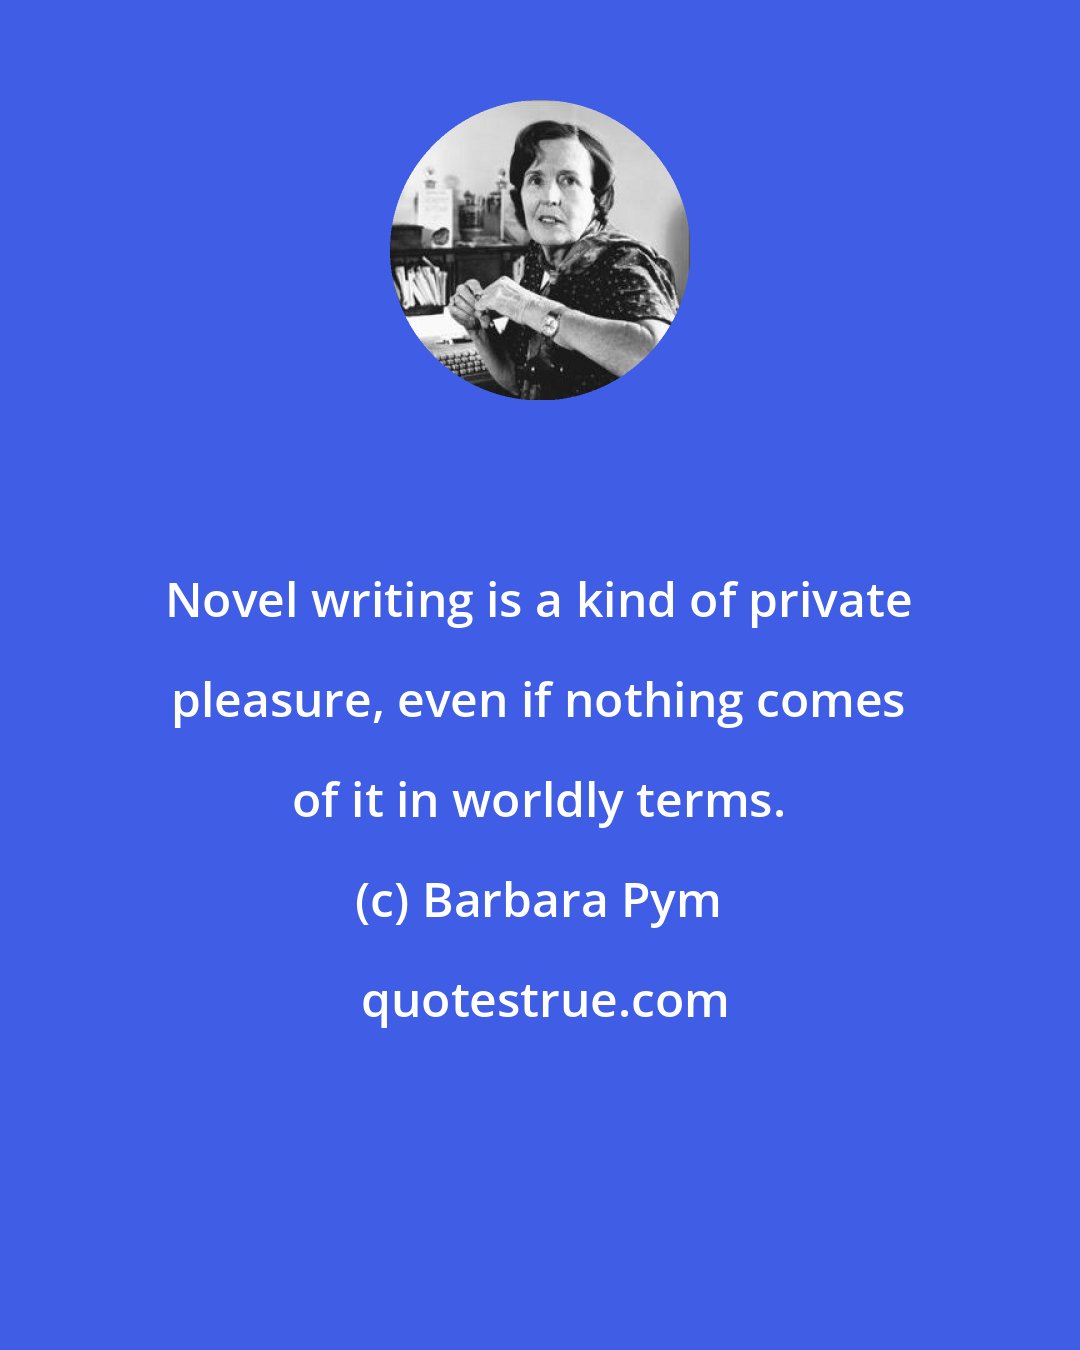 Barbara Pym: Novel writing is a kind of private pleasure, even if nothing comes of it in worldly terms.